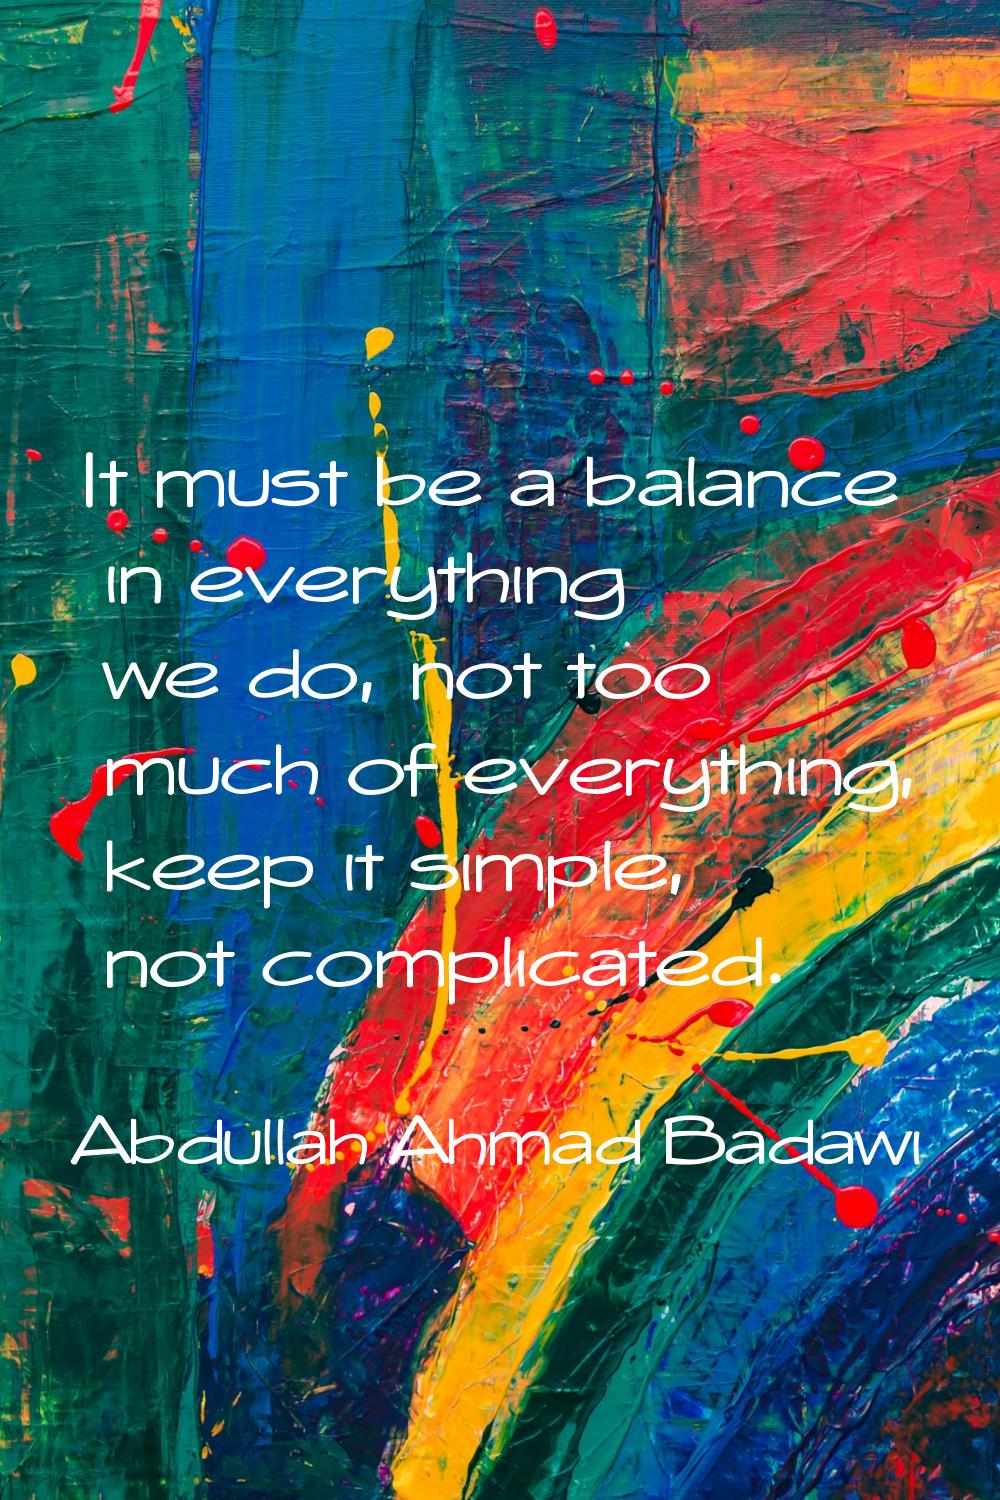 It must be a balance in everything we do, not too much of everything, keep it simple, not complicat